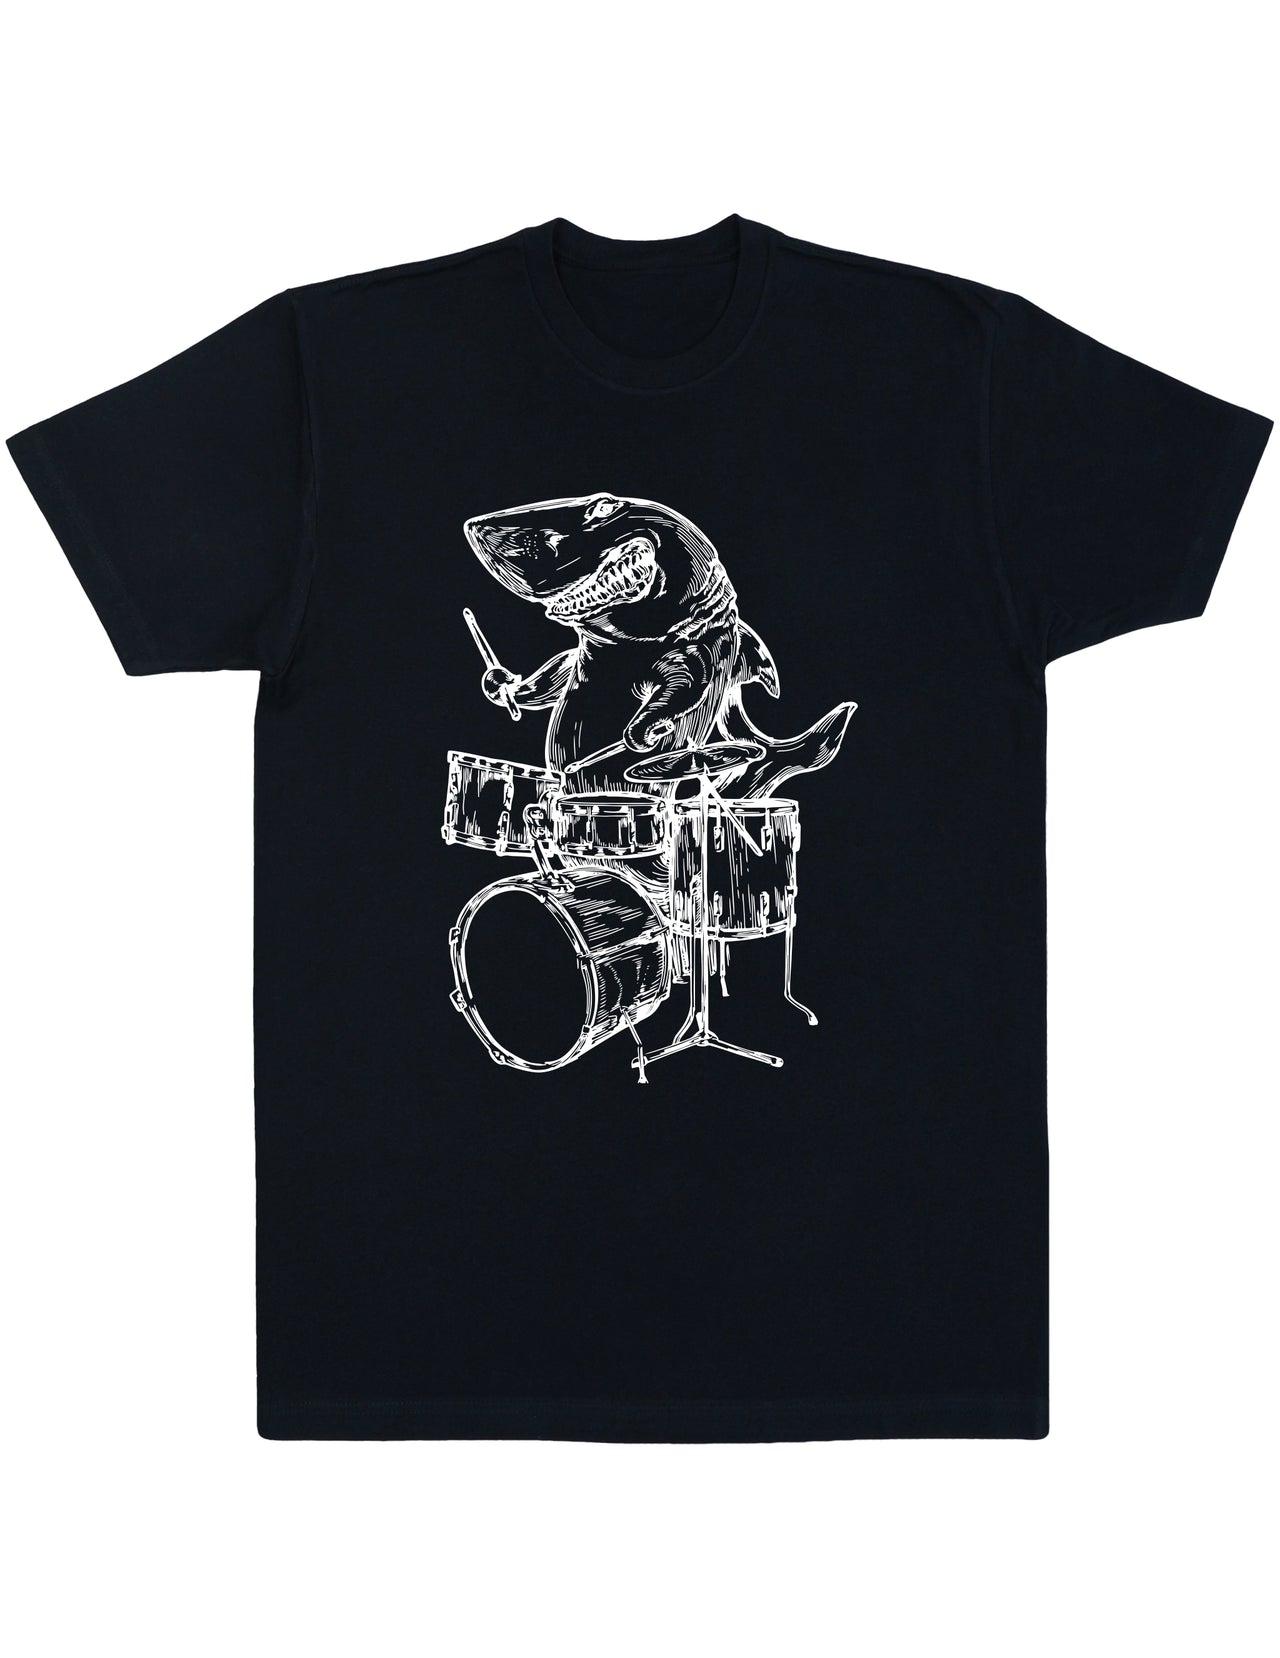 SEEMBO Shark Playing Drums Funny Drummer Musician Music Band Men Cotton T-Shirt